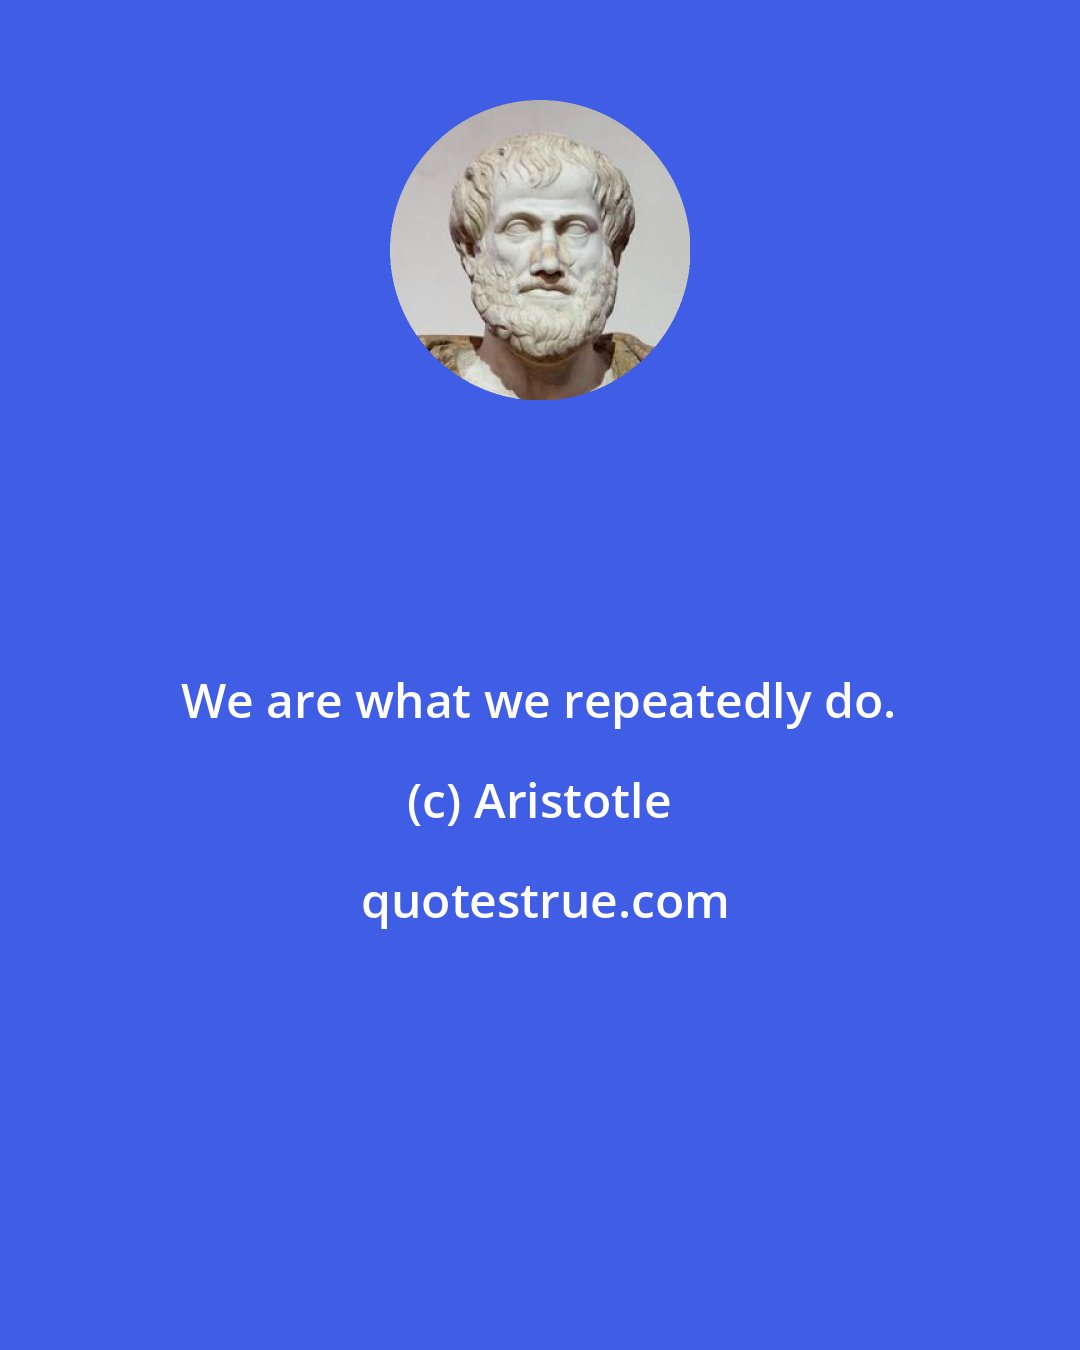 Aristotle: We are what we repeatedly do.